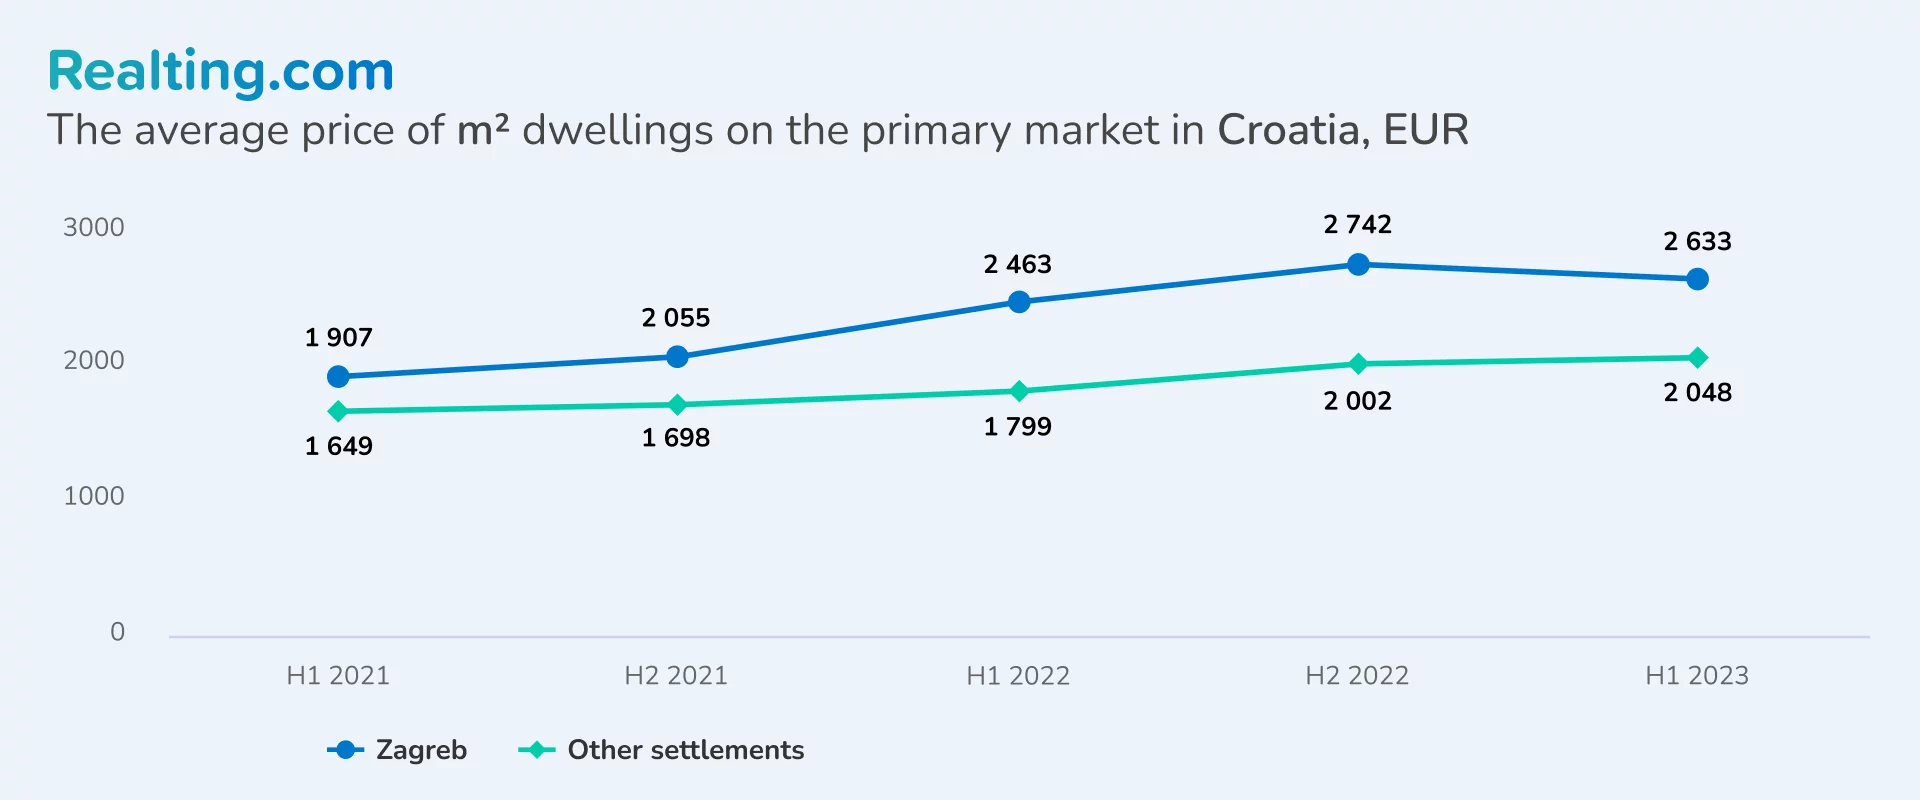 The average price of m2 dwellings on the primary market in Croatia, EUR